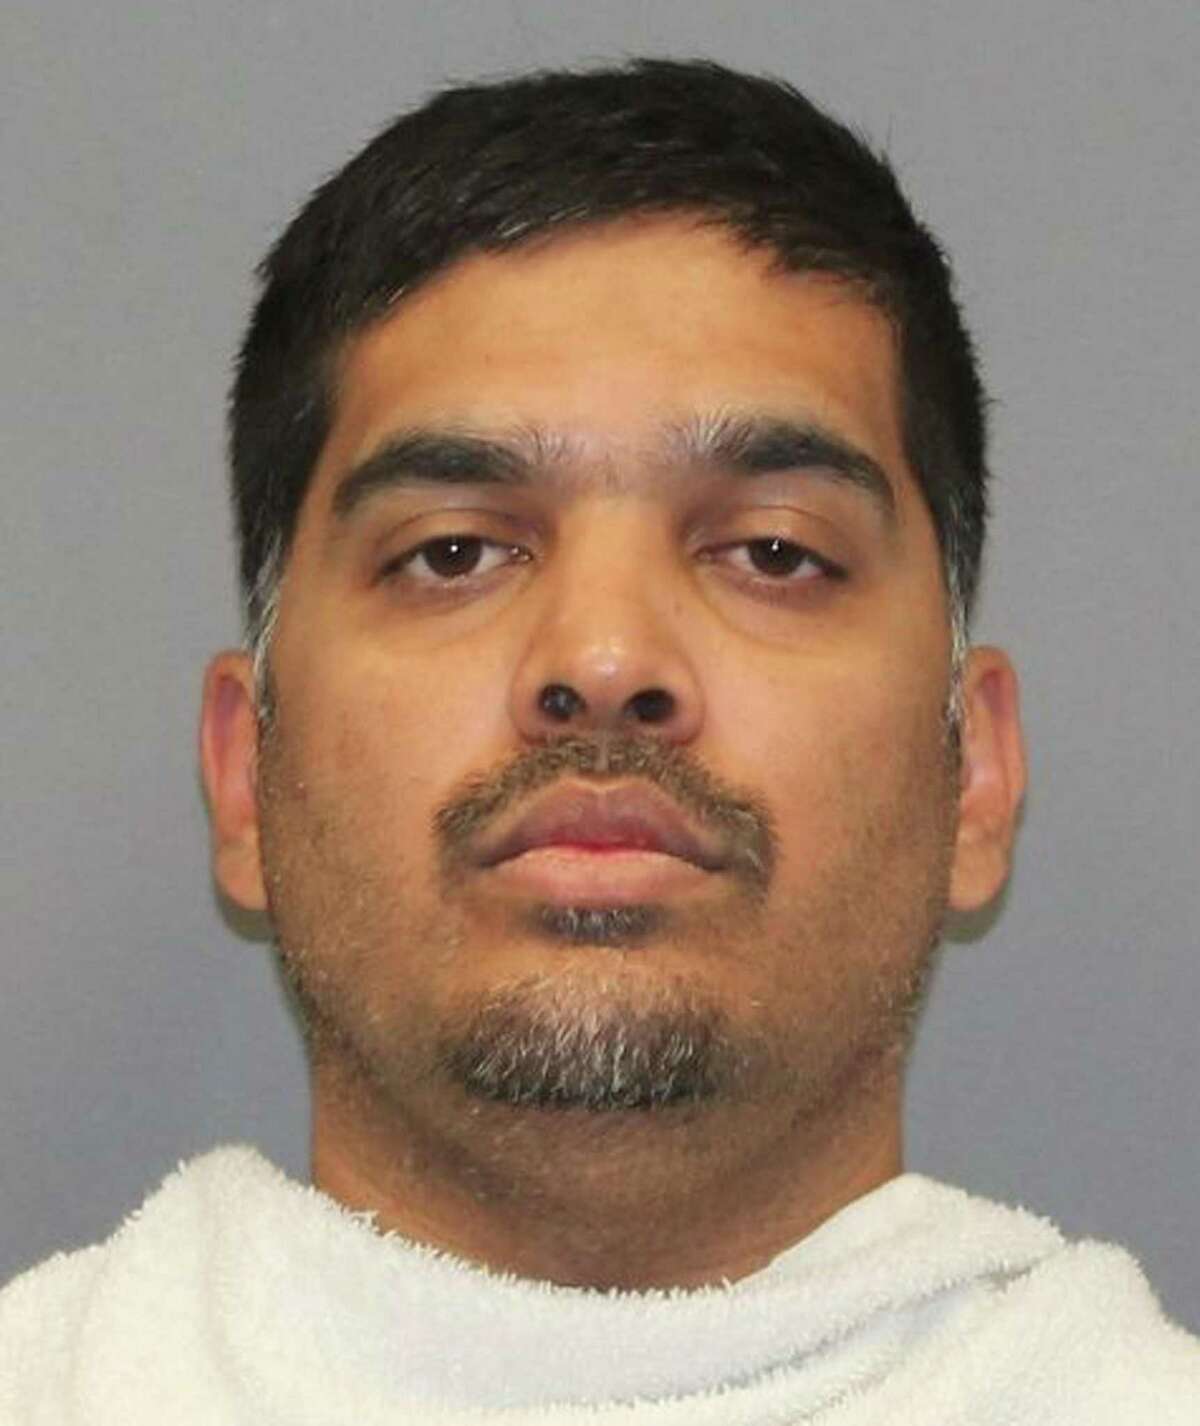 In this Saturday, Oct. 7, 2017 photo provided by the Richardson Texas Police Department, Wesley Mathews is shown. Mathews was arrested Saturday on a charge of abandoning or endangering a child. Authorities were searching Monday for the 3-year-old suburban Dallas girl after she went missing over the weekend when her Mathews allegedly made her stand outside in the middle of the night as punishment for not drinking her milk. (Richardson Texas Police Department via AP)